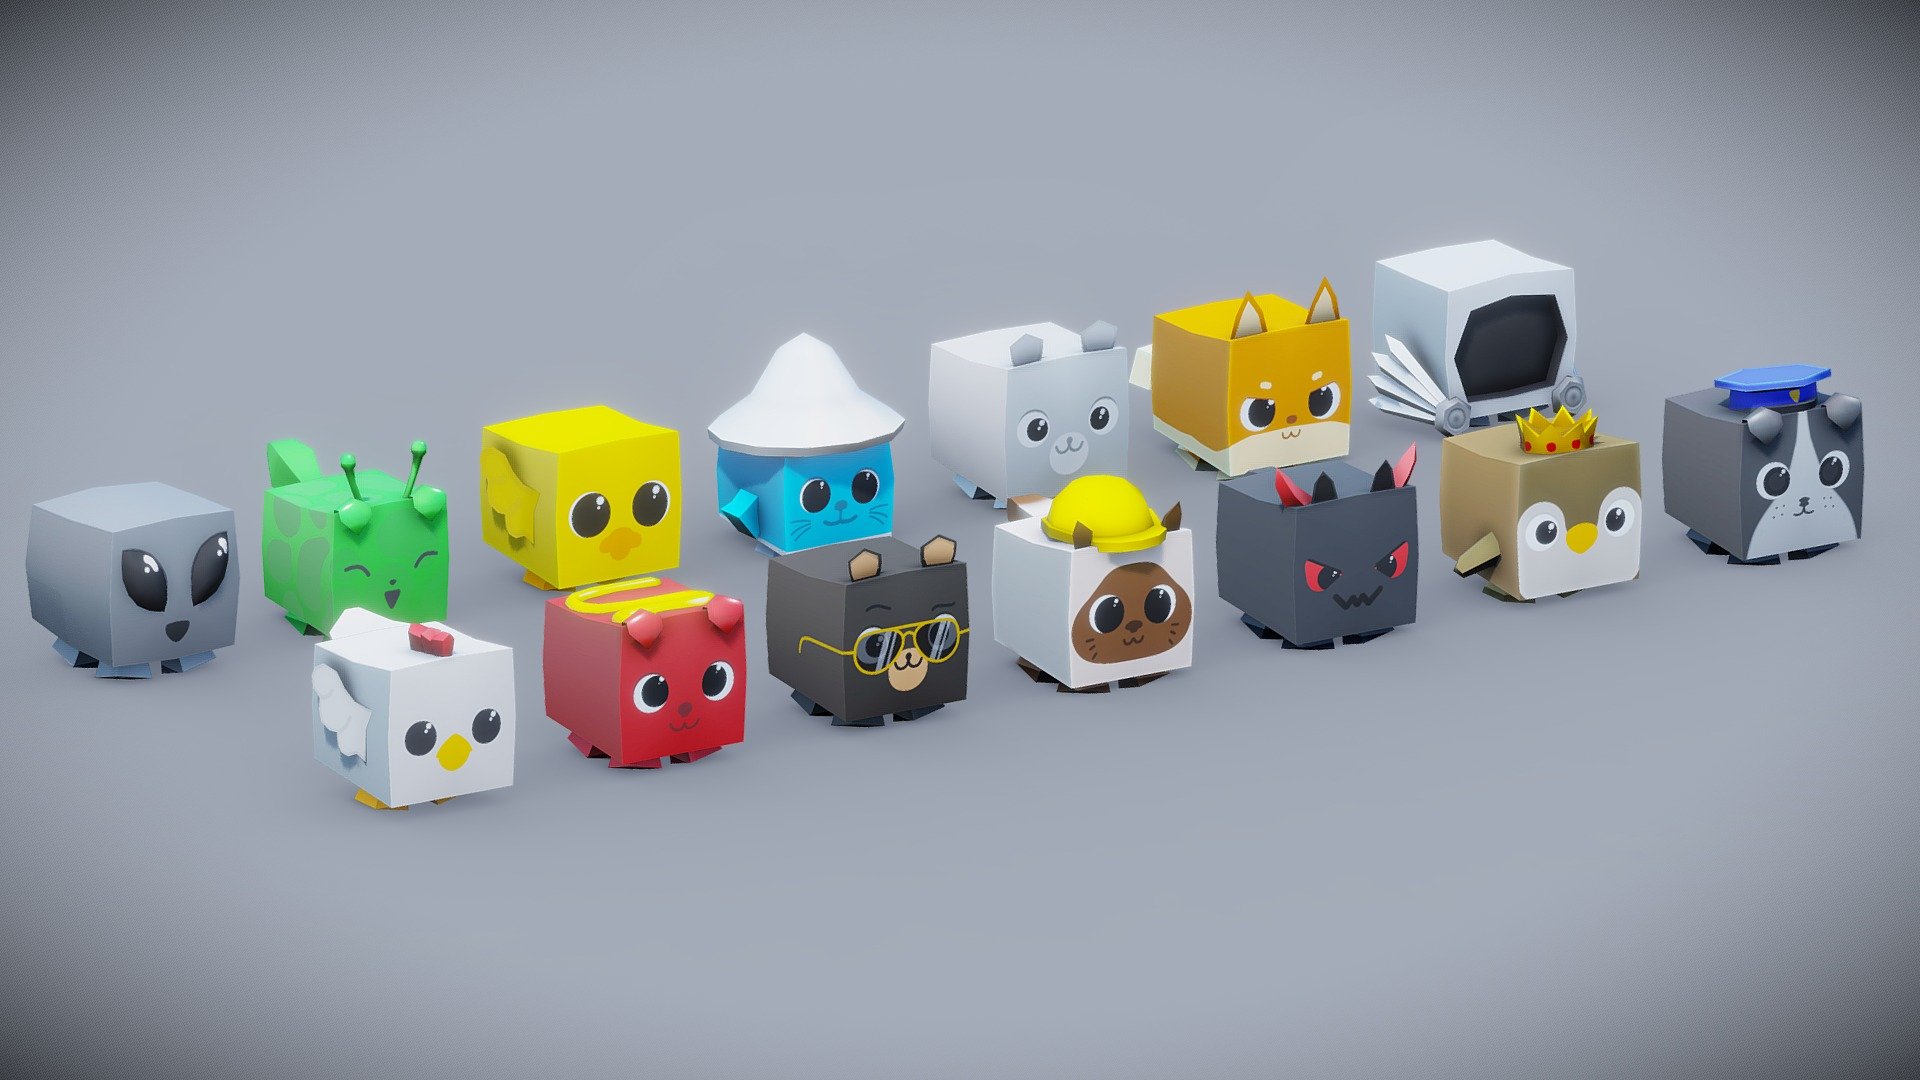 A Series of pets made for a simulator project 😊, 
Check out the game here: https://www.roblox.com/games/13963643626/Pet-Battle-Simulator
ArtStation: https://www.artstation.com/artwork/EvKZa2

All these models are owned by Bro Entertainment 3d model